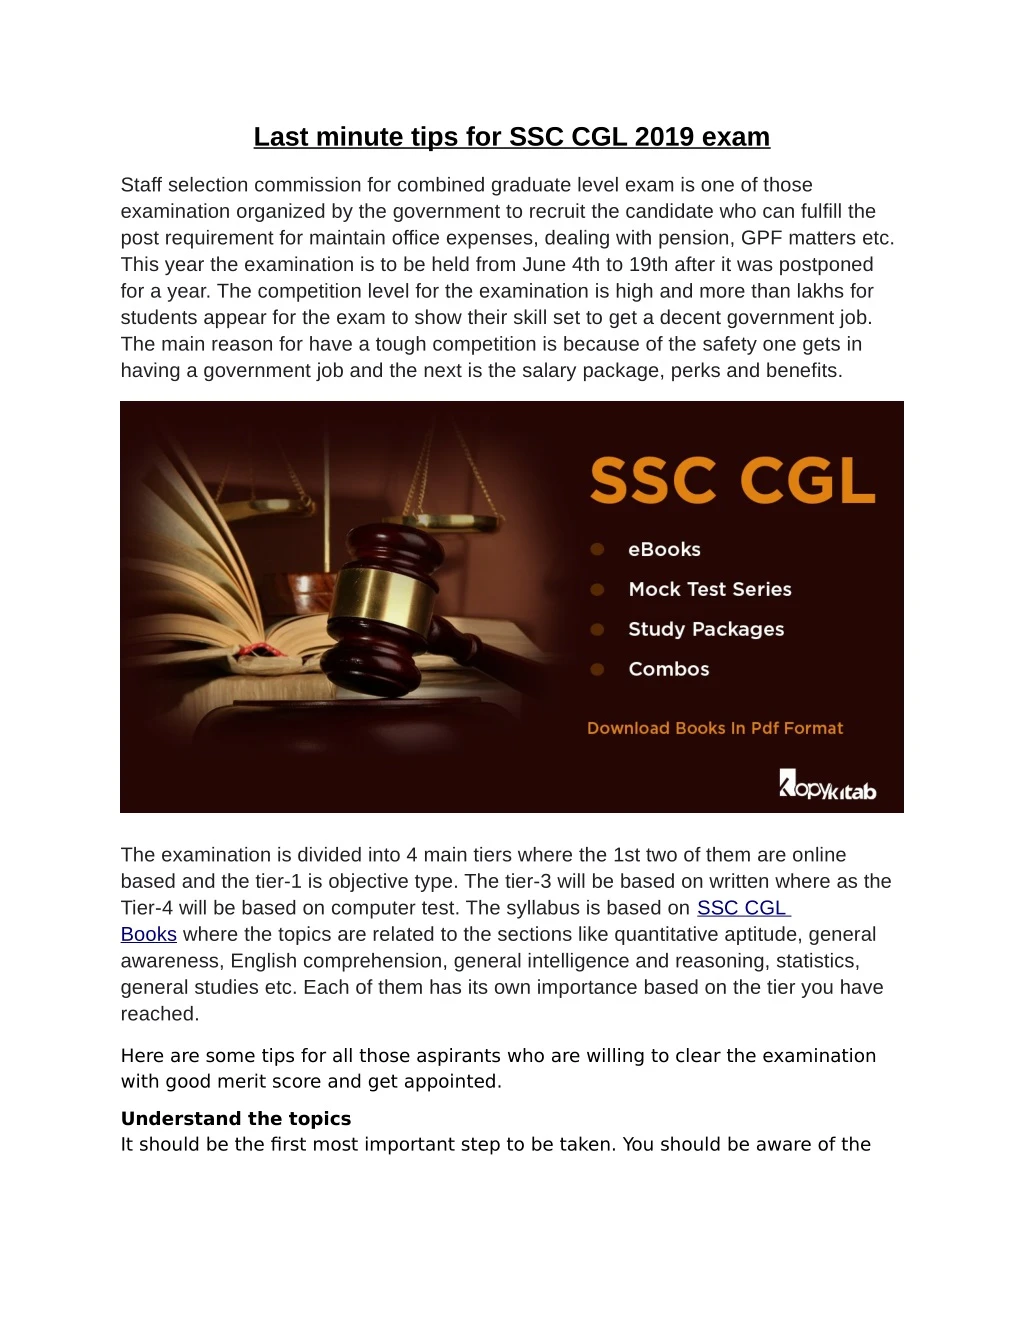 last minute tips for ssc cgl 2019 exam